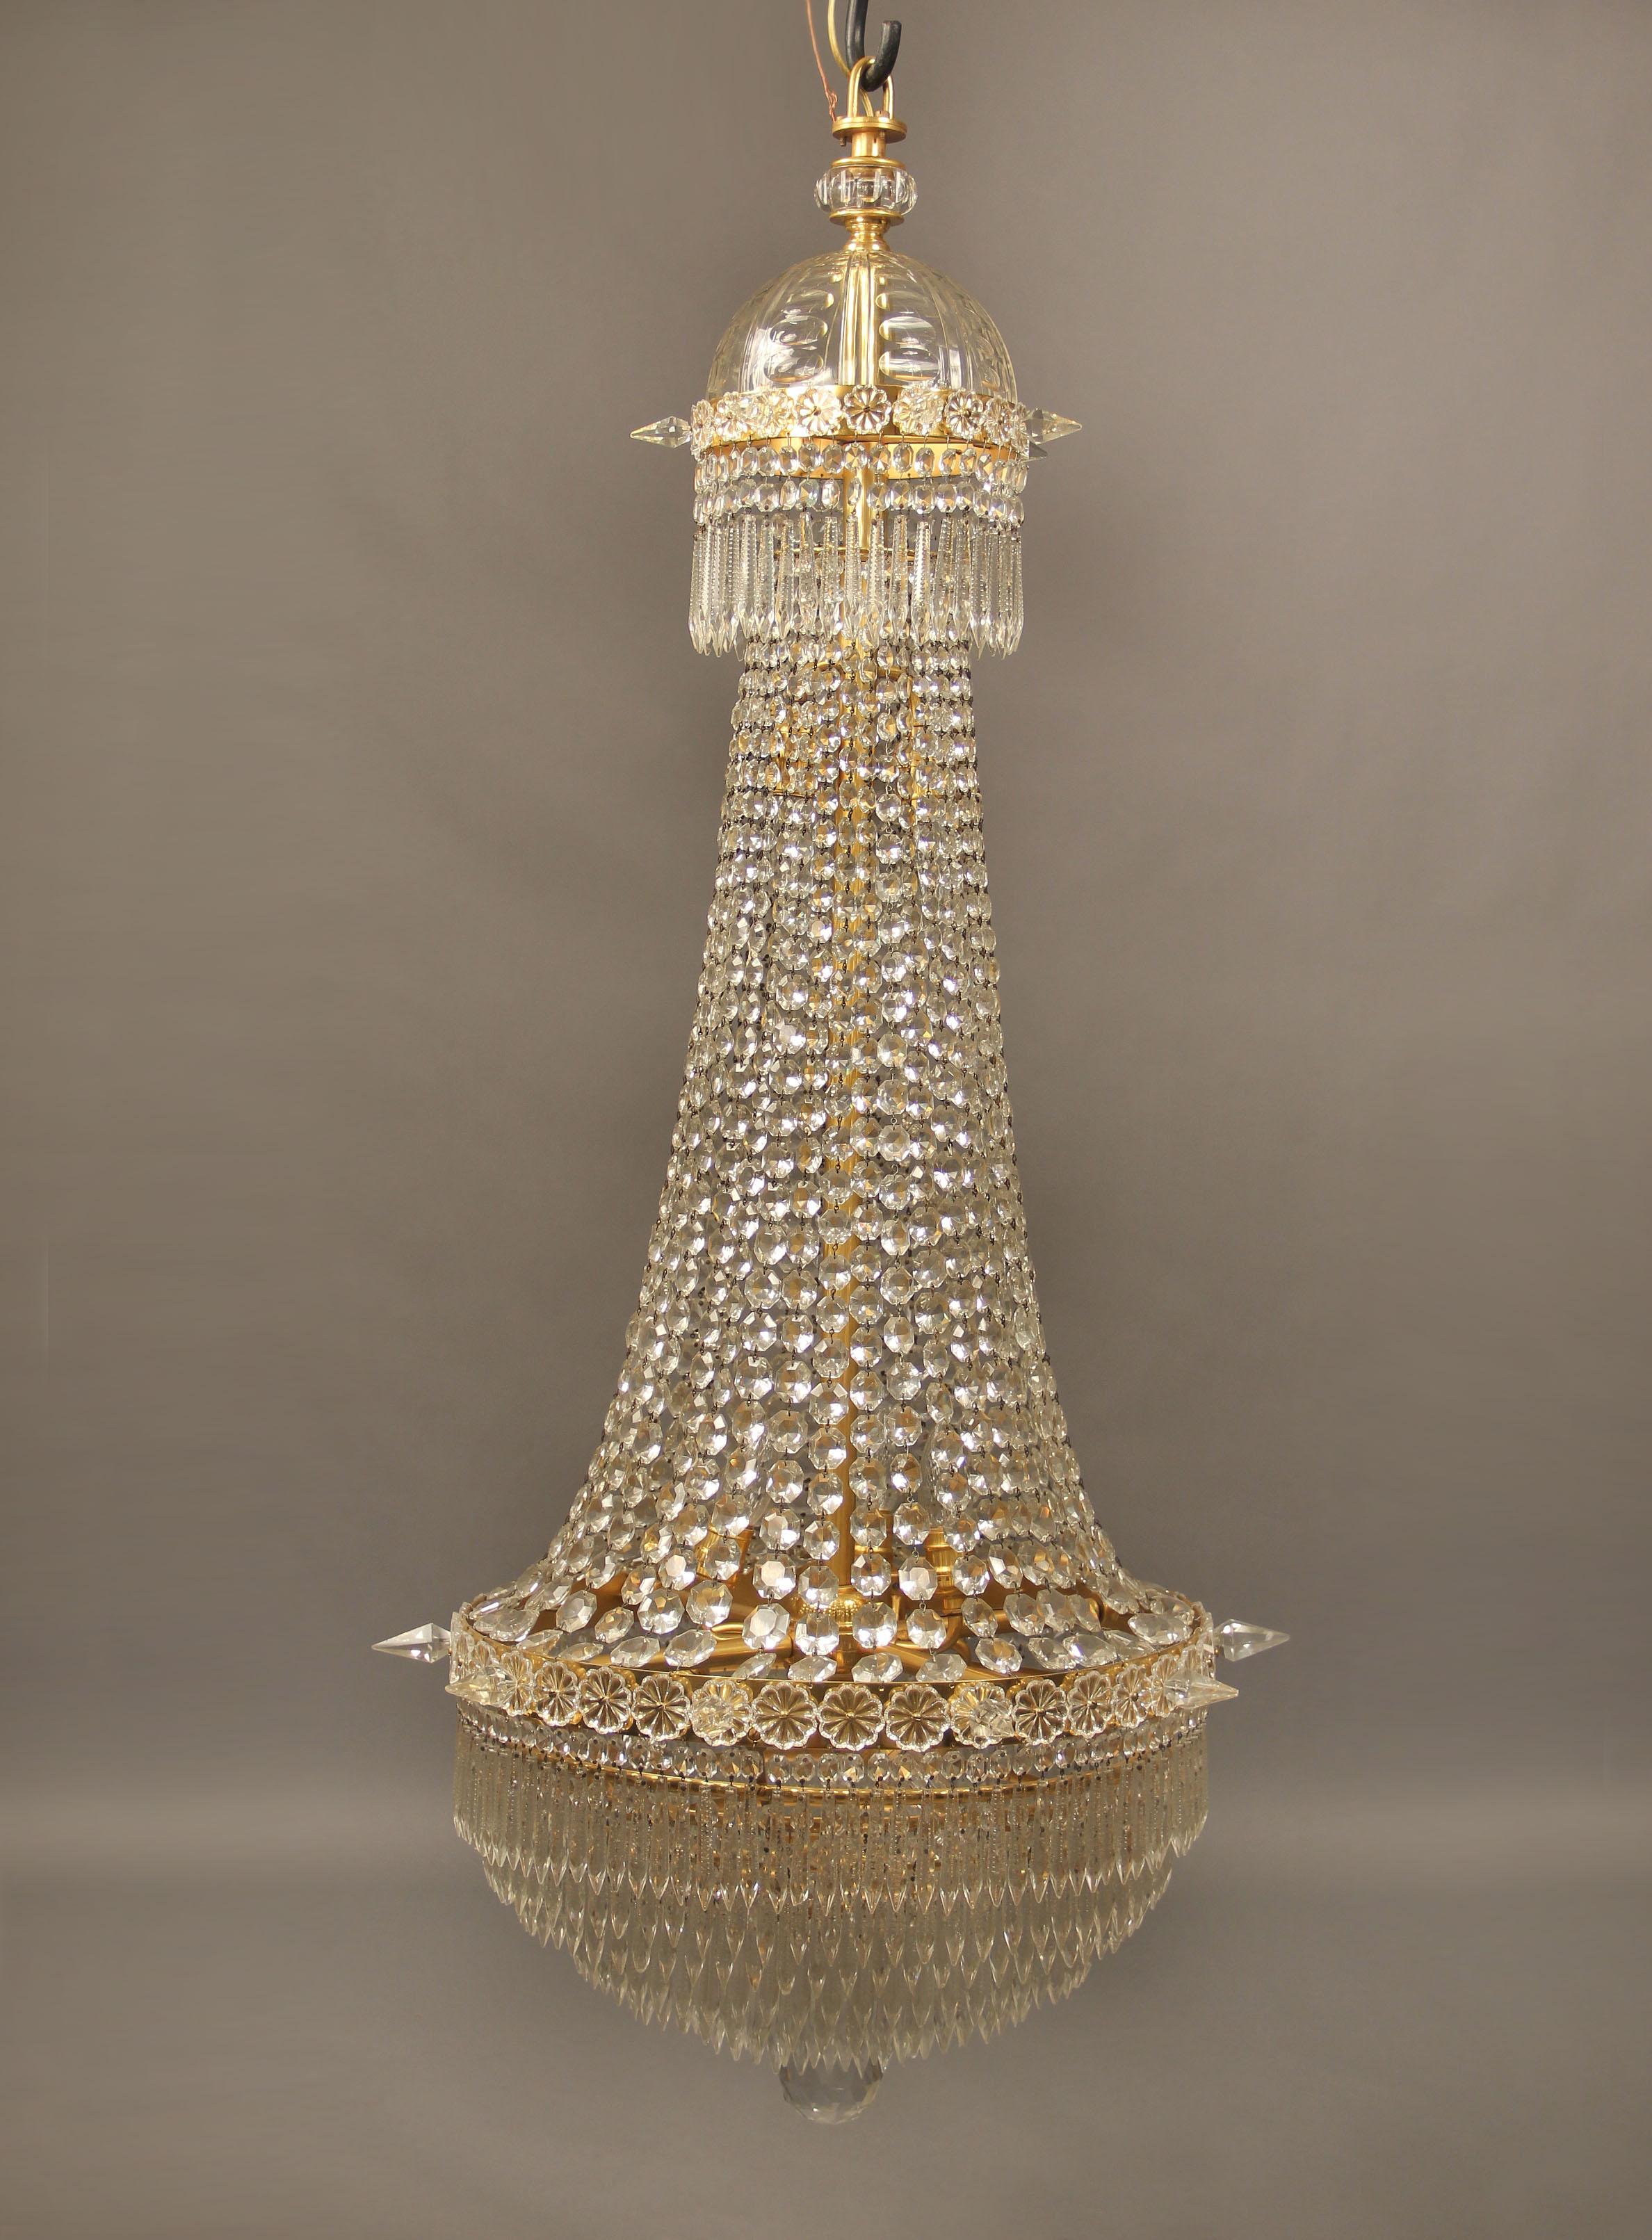 A Beautiful Late 19th Century Gilt Bronze Beaded Eight Light Drop Crystal Chandelier

With a fine crystal dome on top and layered drop crystal ending in a beautiful cut crystal ball.

If you are looking for a chandelier, a lantern or sets of